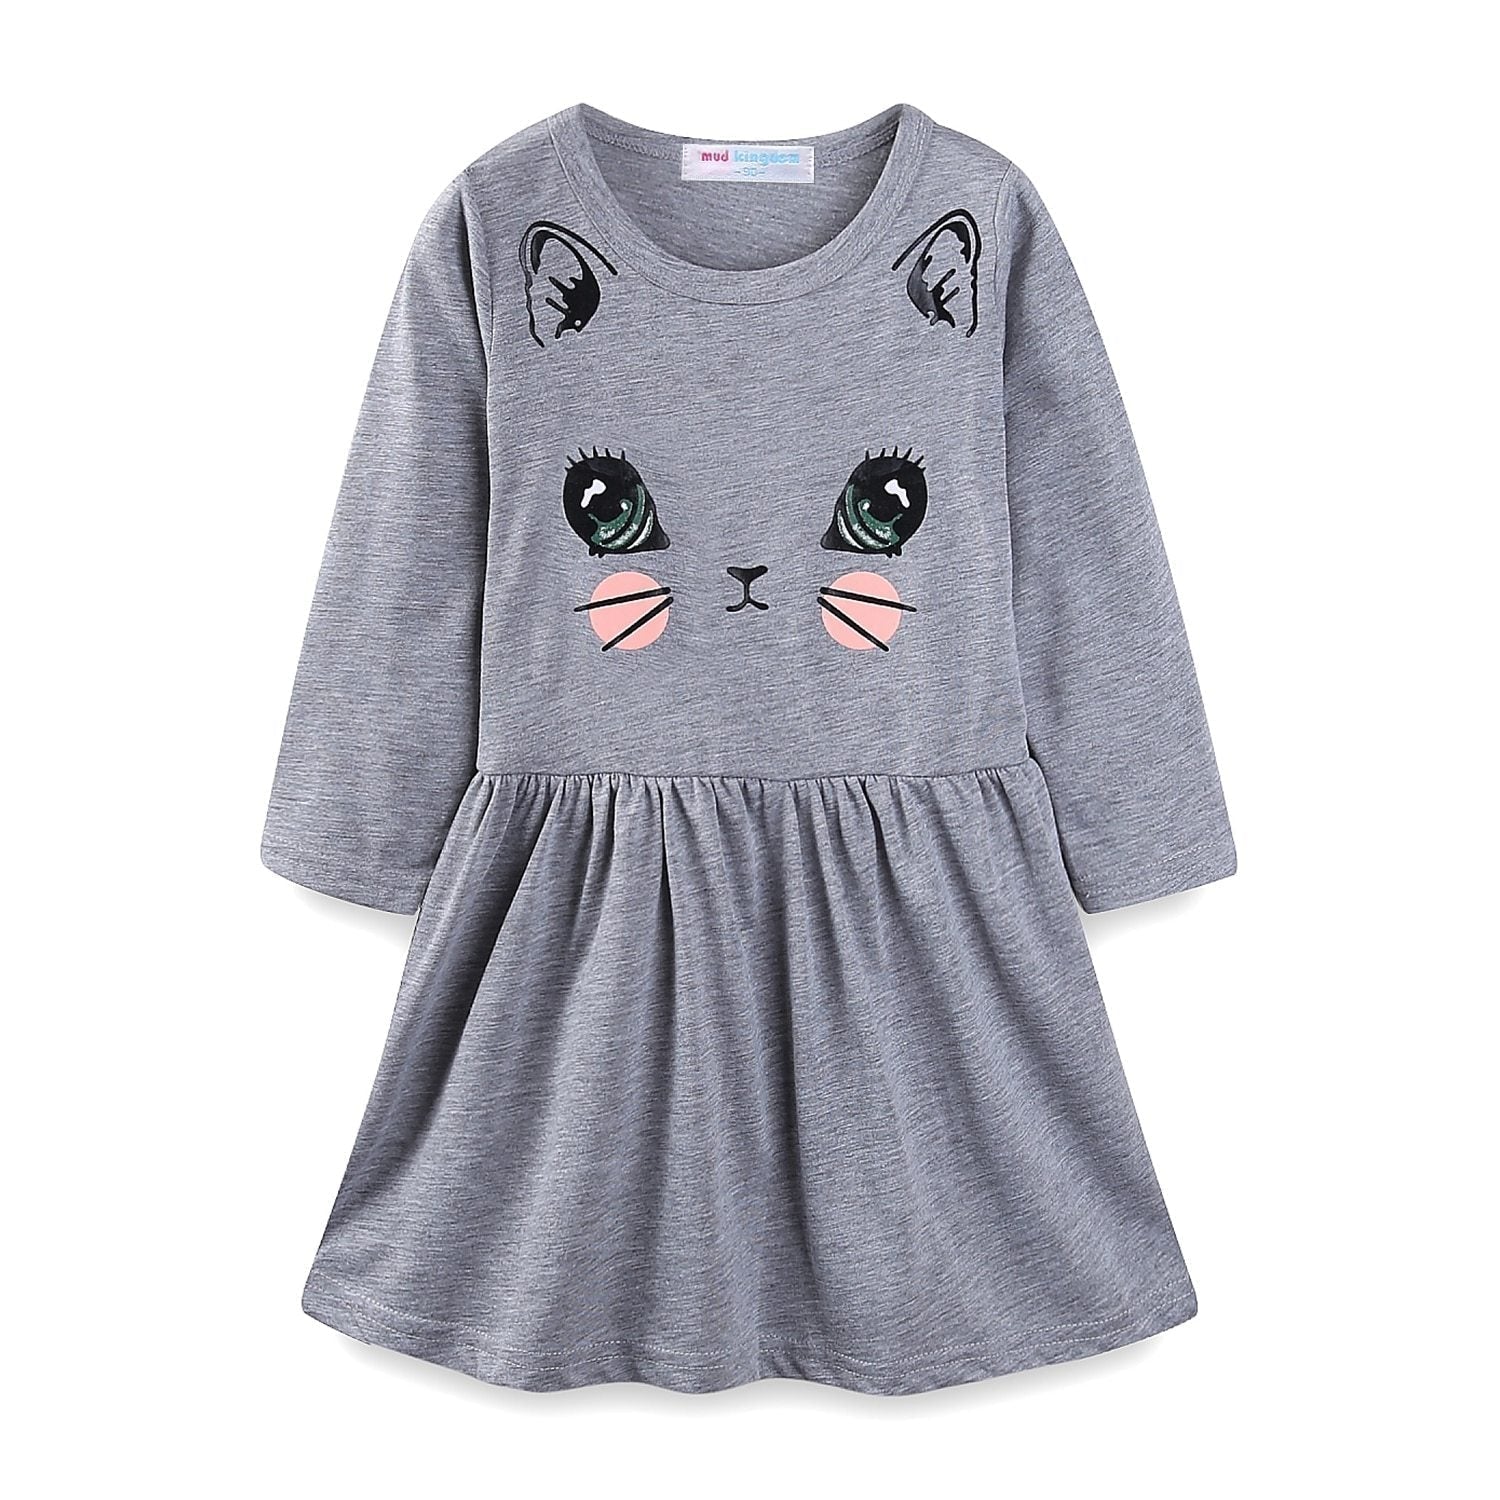 Spring/Autumn Long Sleeves Dress with Cat Design for Girls - Pink & Blue Baby Shop - Review